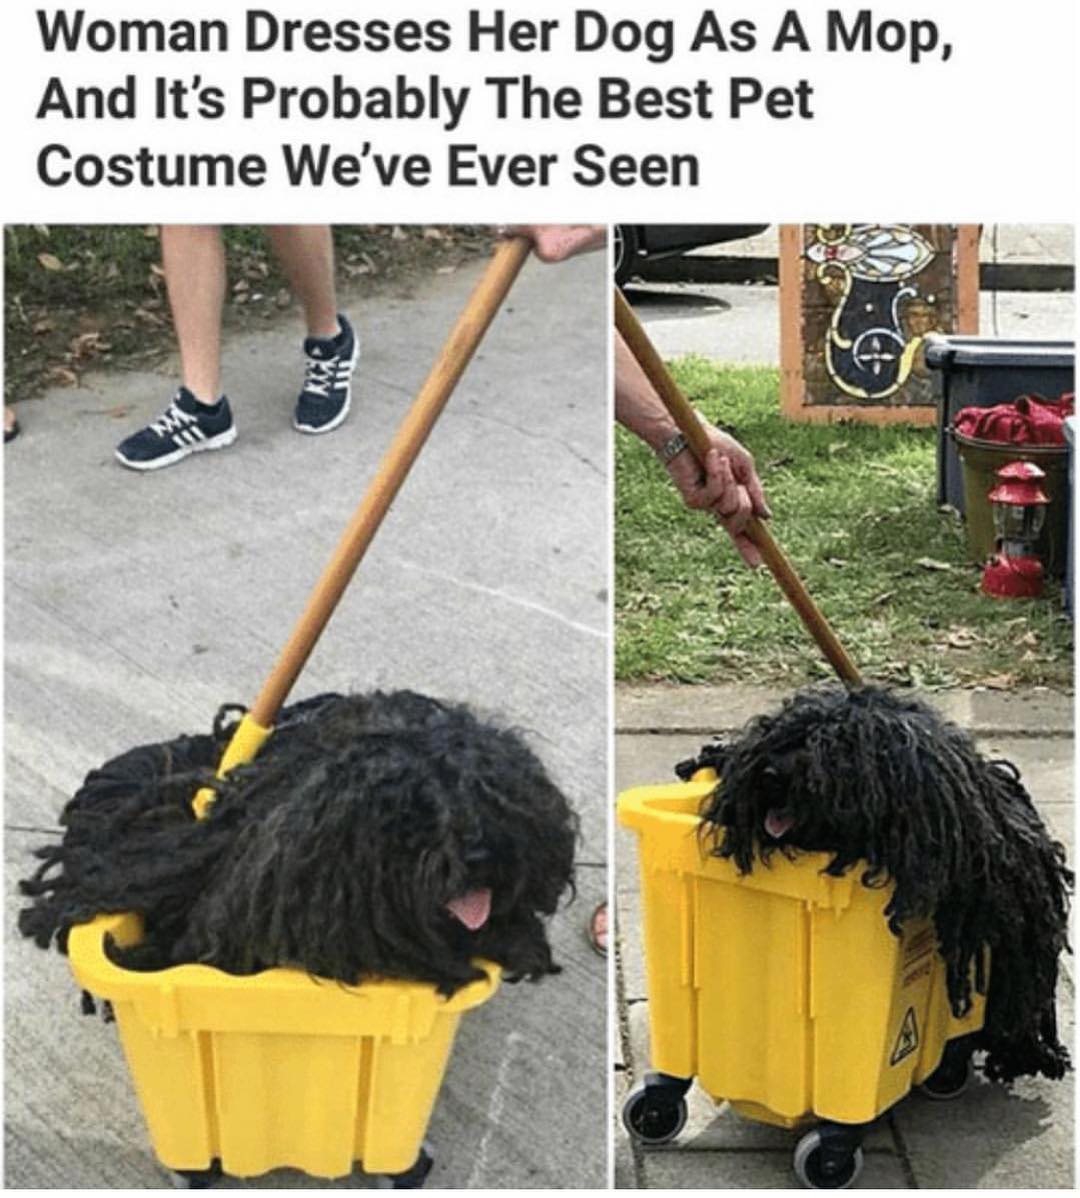 Woman dresses her dog as a mop, and it's probably the best pet costume we've ever seen.